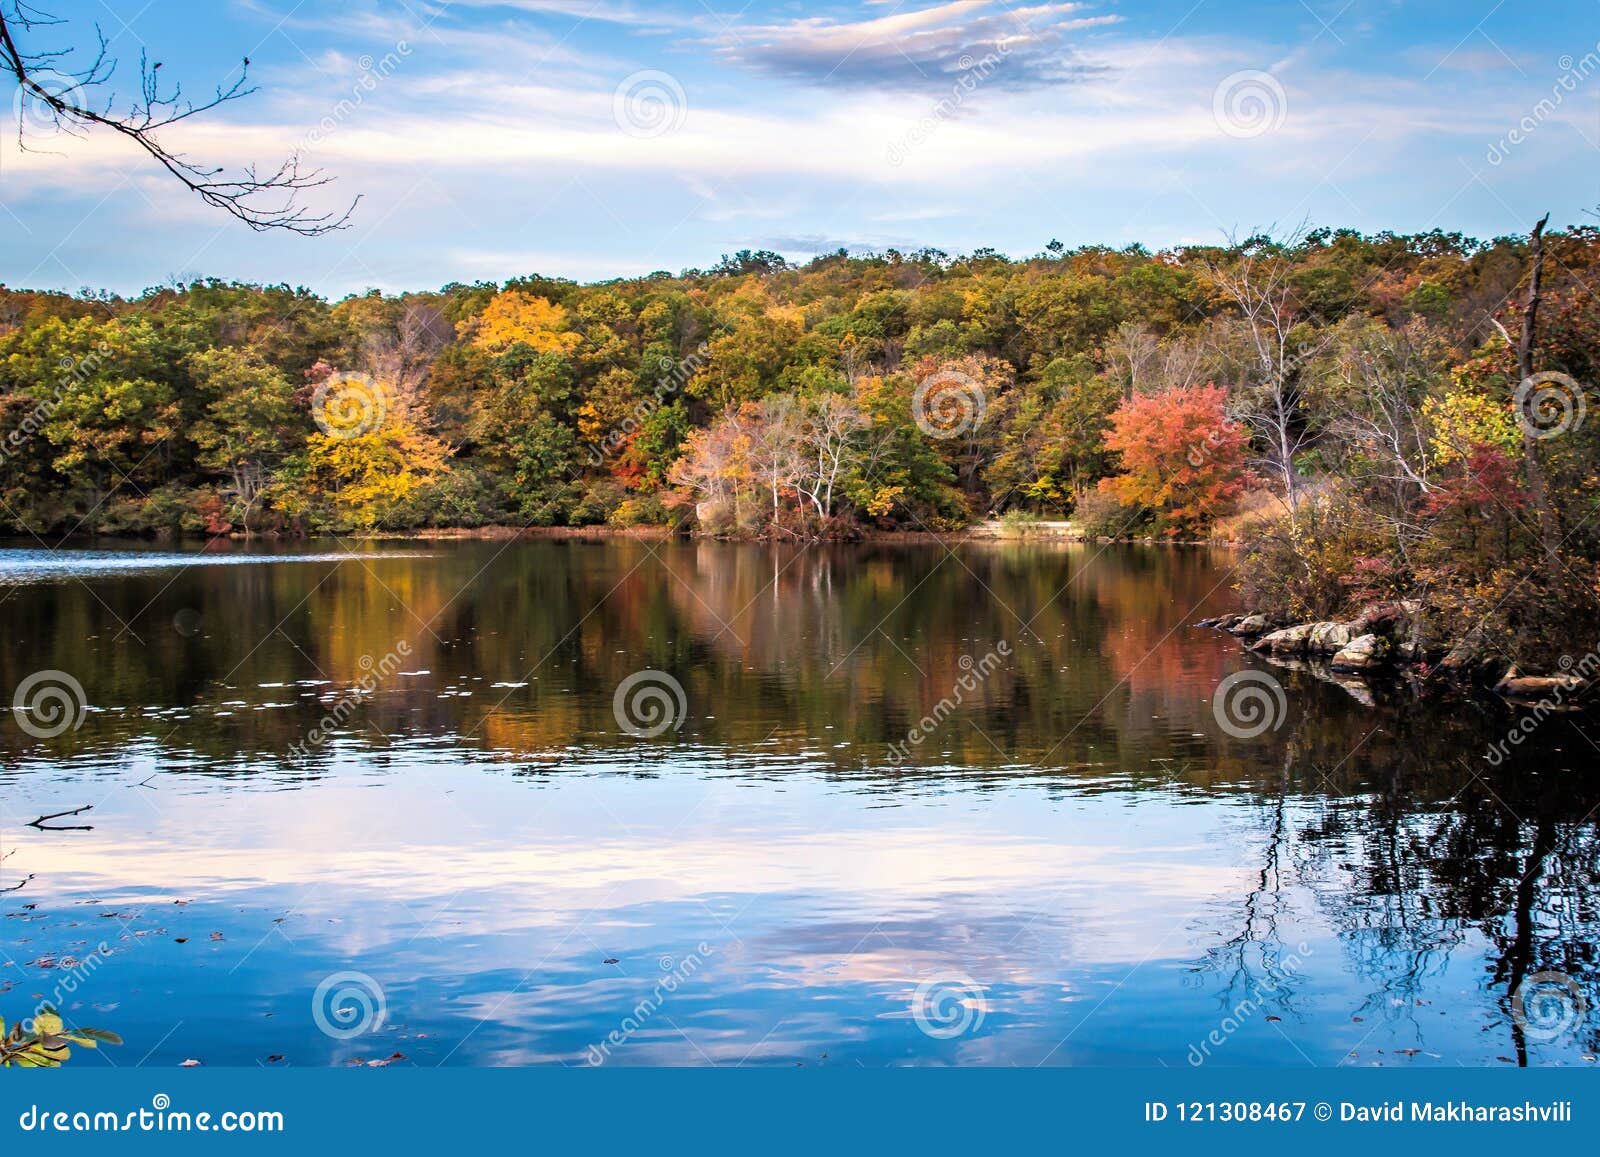 fejl horisont Blodig 17,876 Jersey Nature Photos - Free & Royalty-Free Stock Photos from  Dreamstime